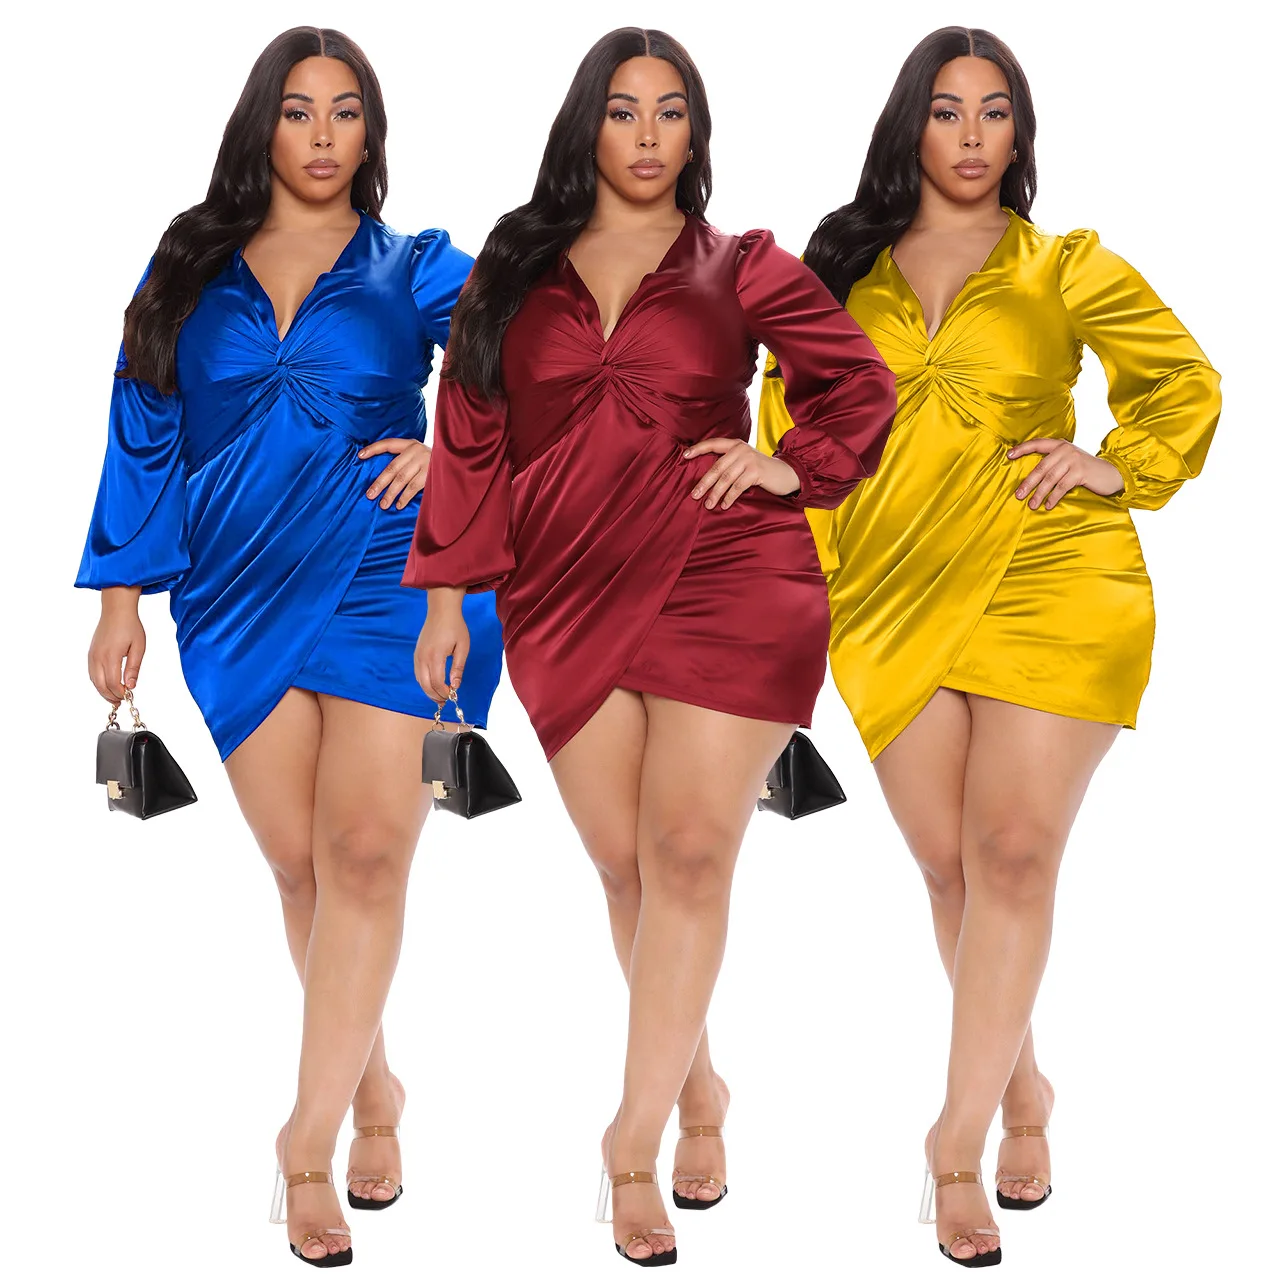 Hot Selling Ladies Casual Dress Flare Sleeve Solid Plus Size Office Fall Women Short Dresses